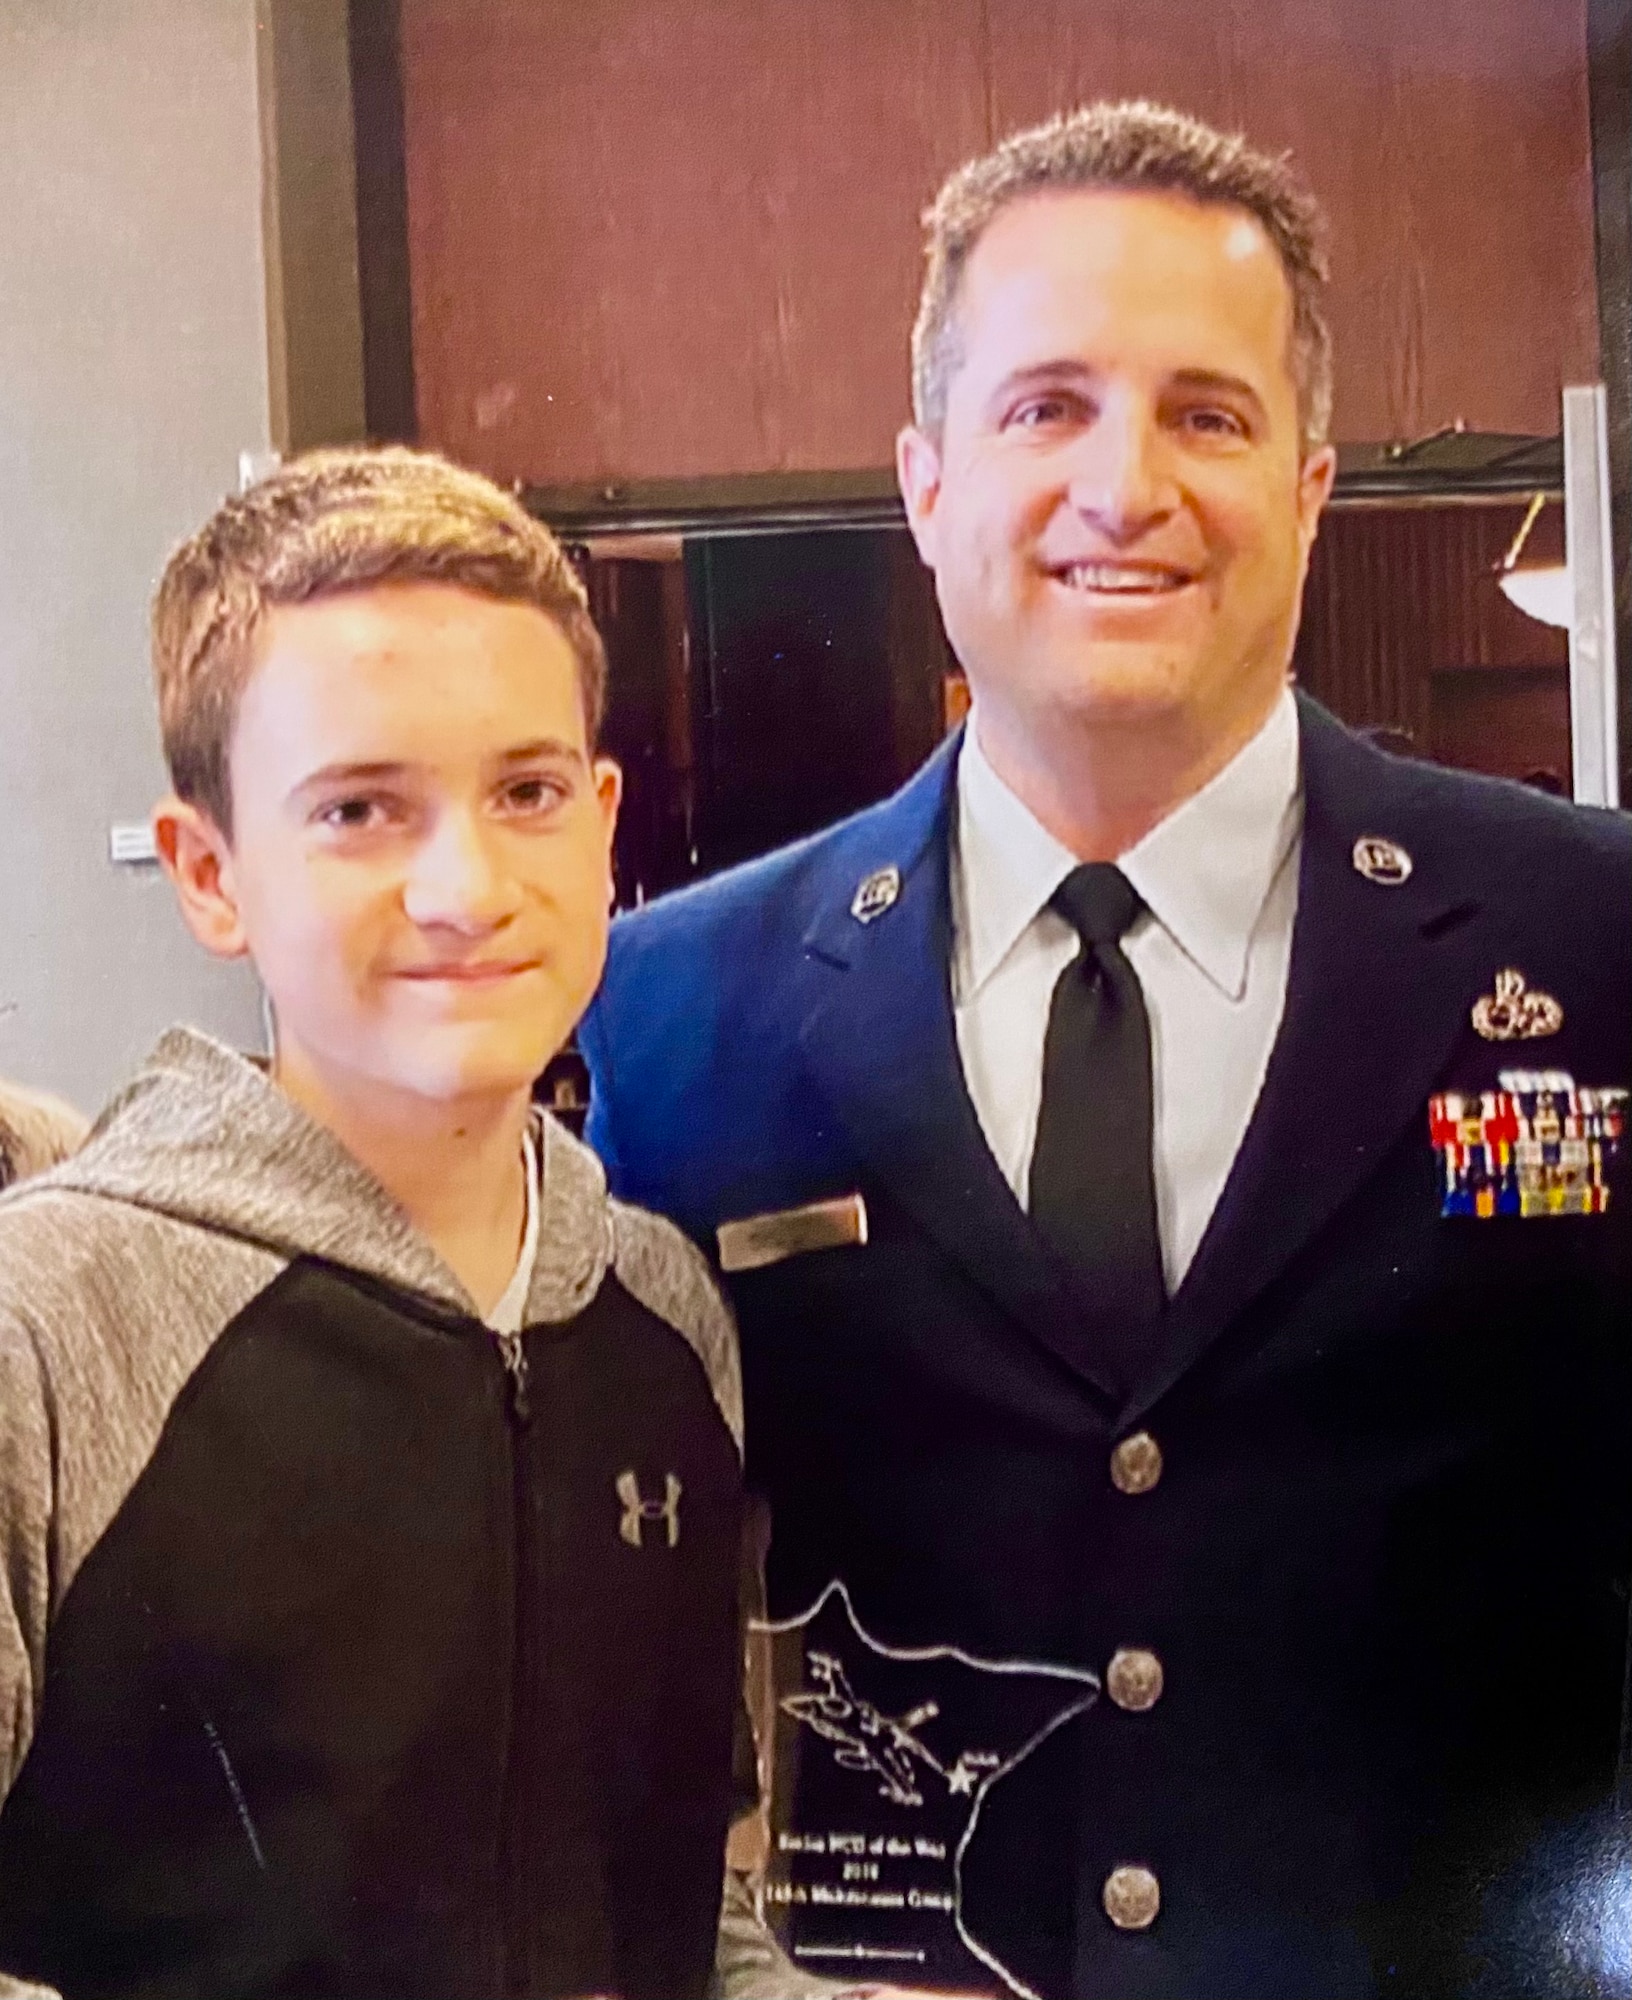 Joey Gigliotti poses for a photo with his father, Chief Master Sgt. Ryan Gigliotti. Joey Gigliotti is the third generation of his family to serve in the Air National Guard. (Courtesy Photo)